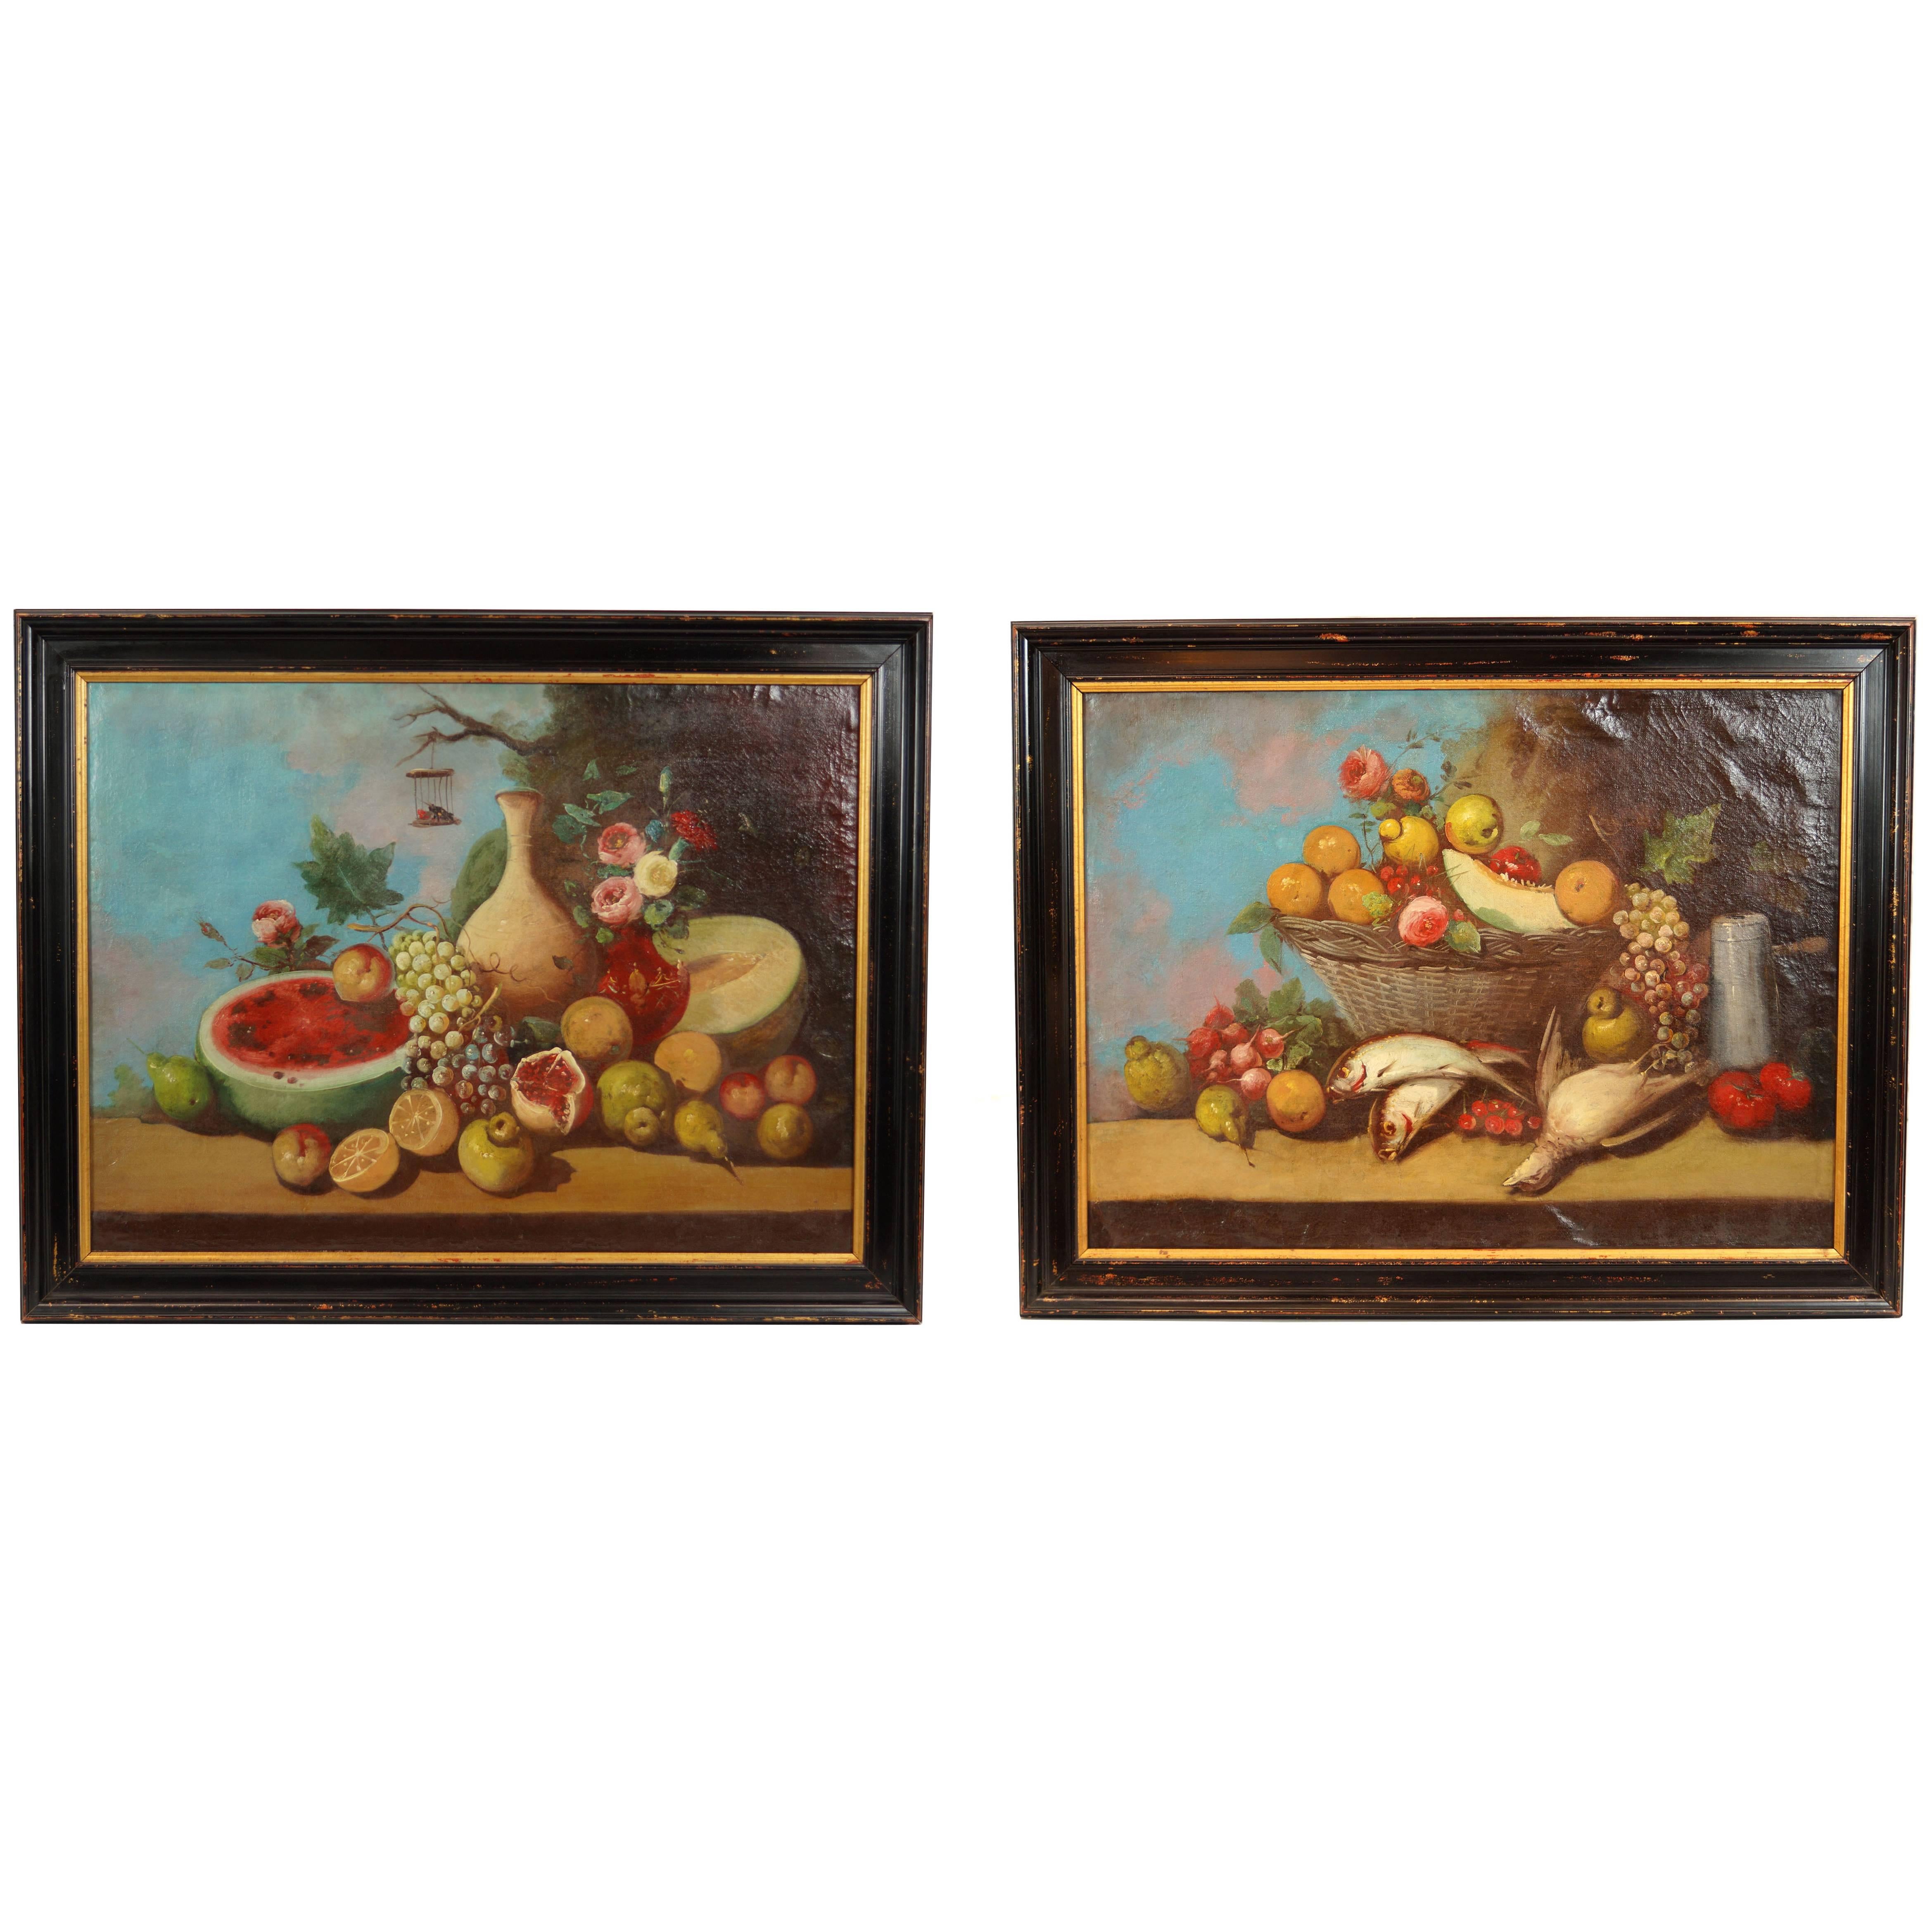 Pair of Still Life Oil on Canvas Paintings of Fruits